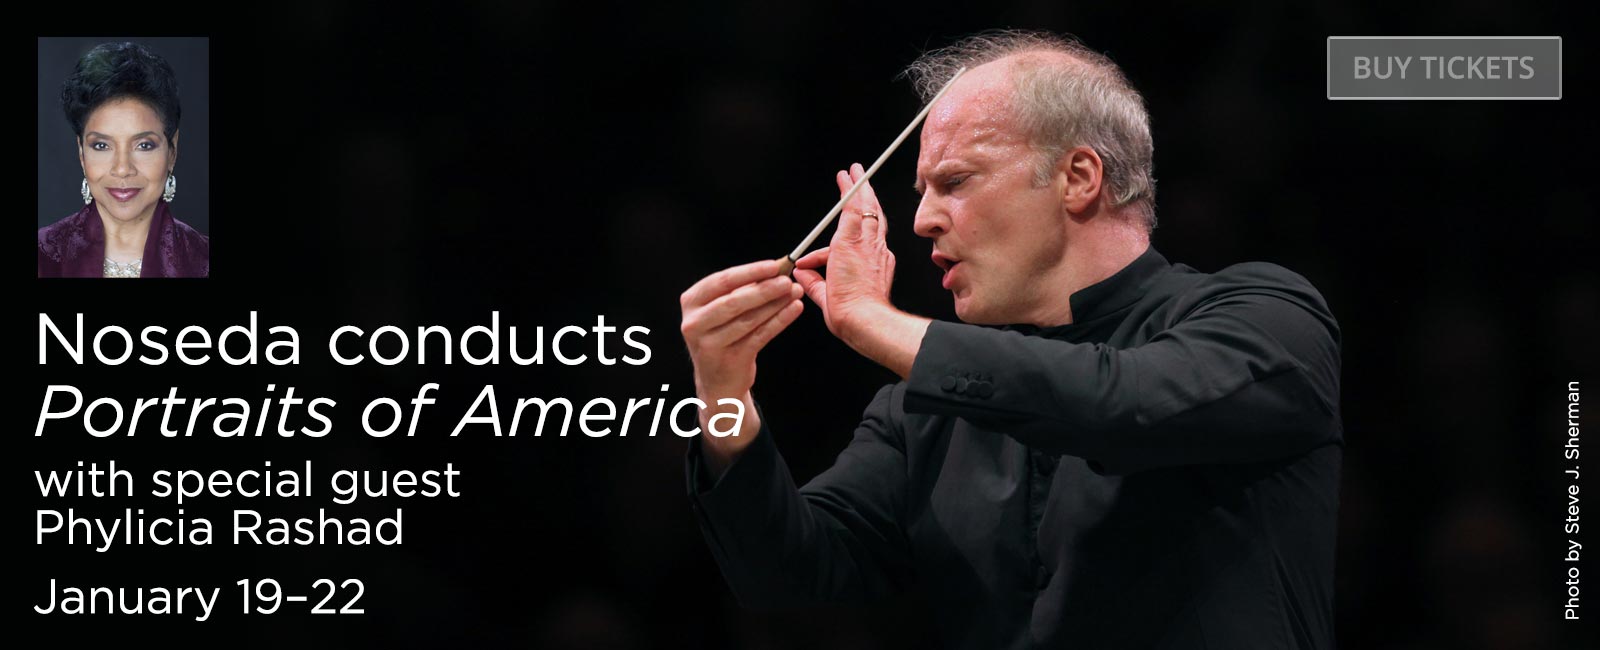 Noseda conducts Portraits of America with special guest Phylicia Rashad